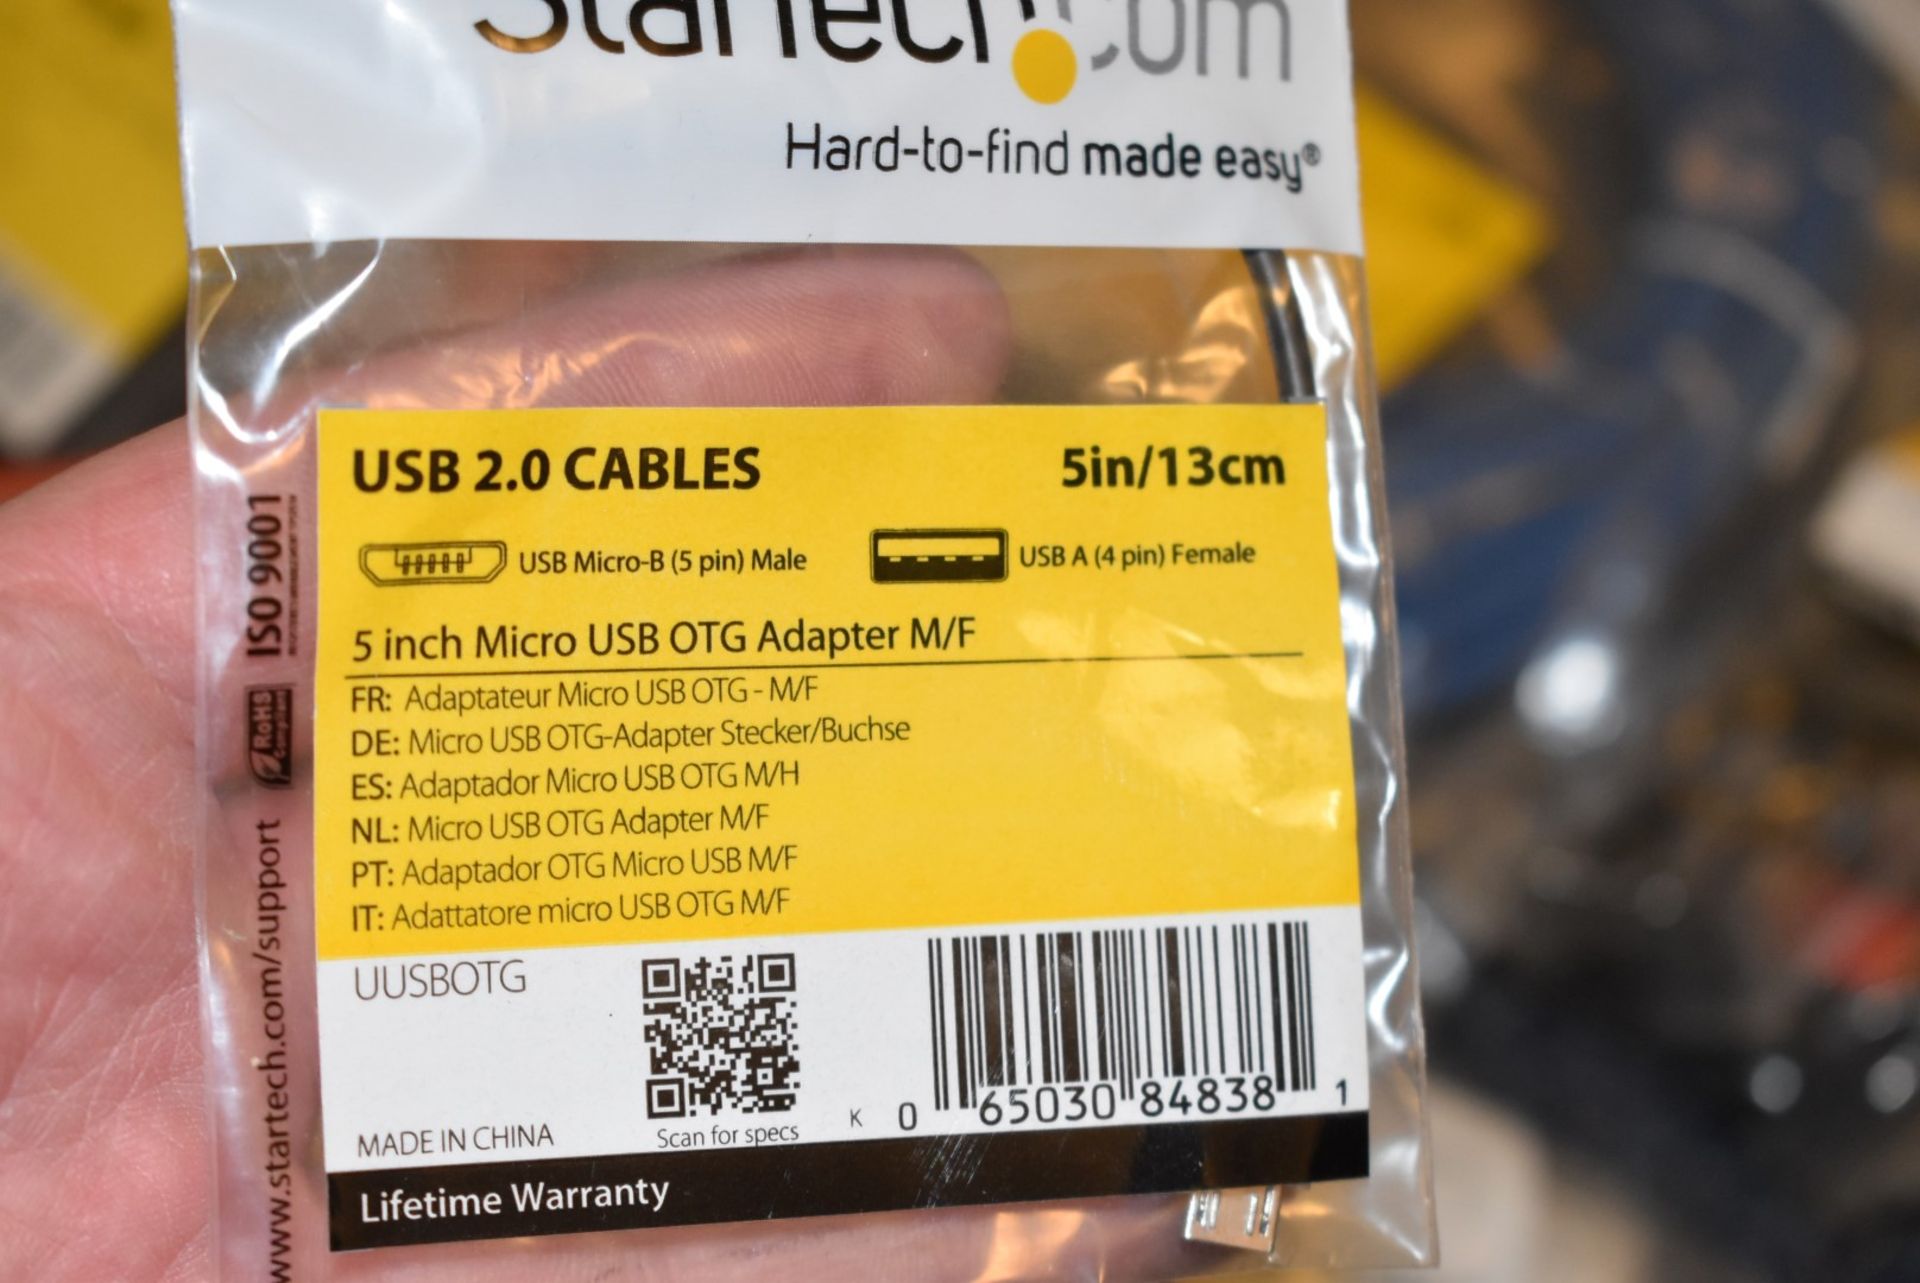 177 x Assorted StarTech Cables - Huge Lot in Original Packing - Various Cables Included - Image 23 of 50